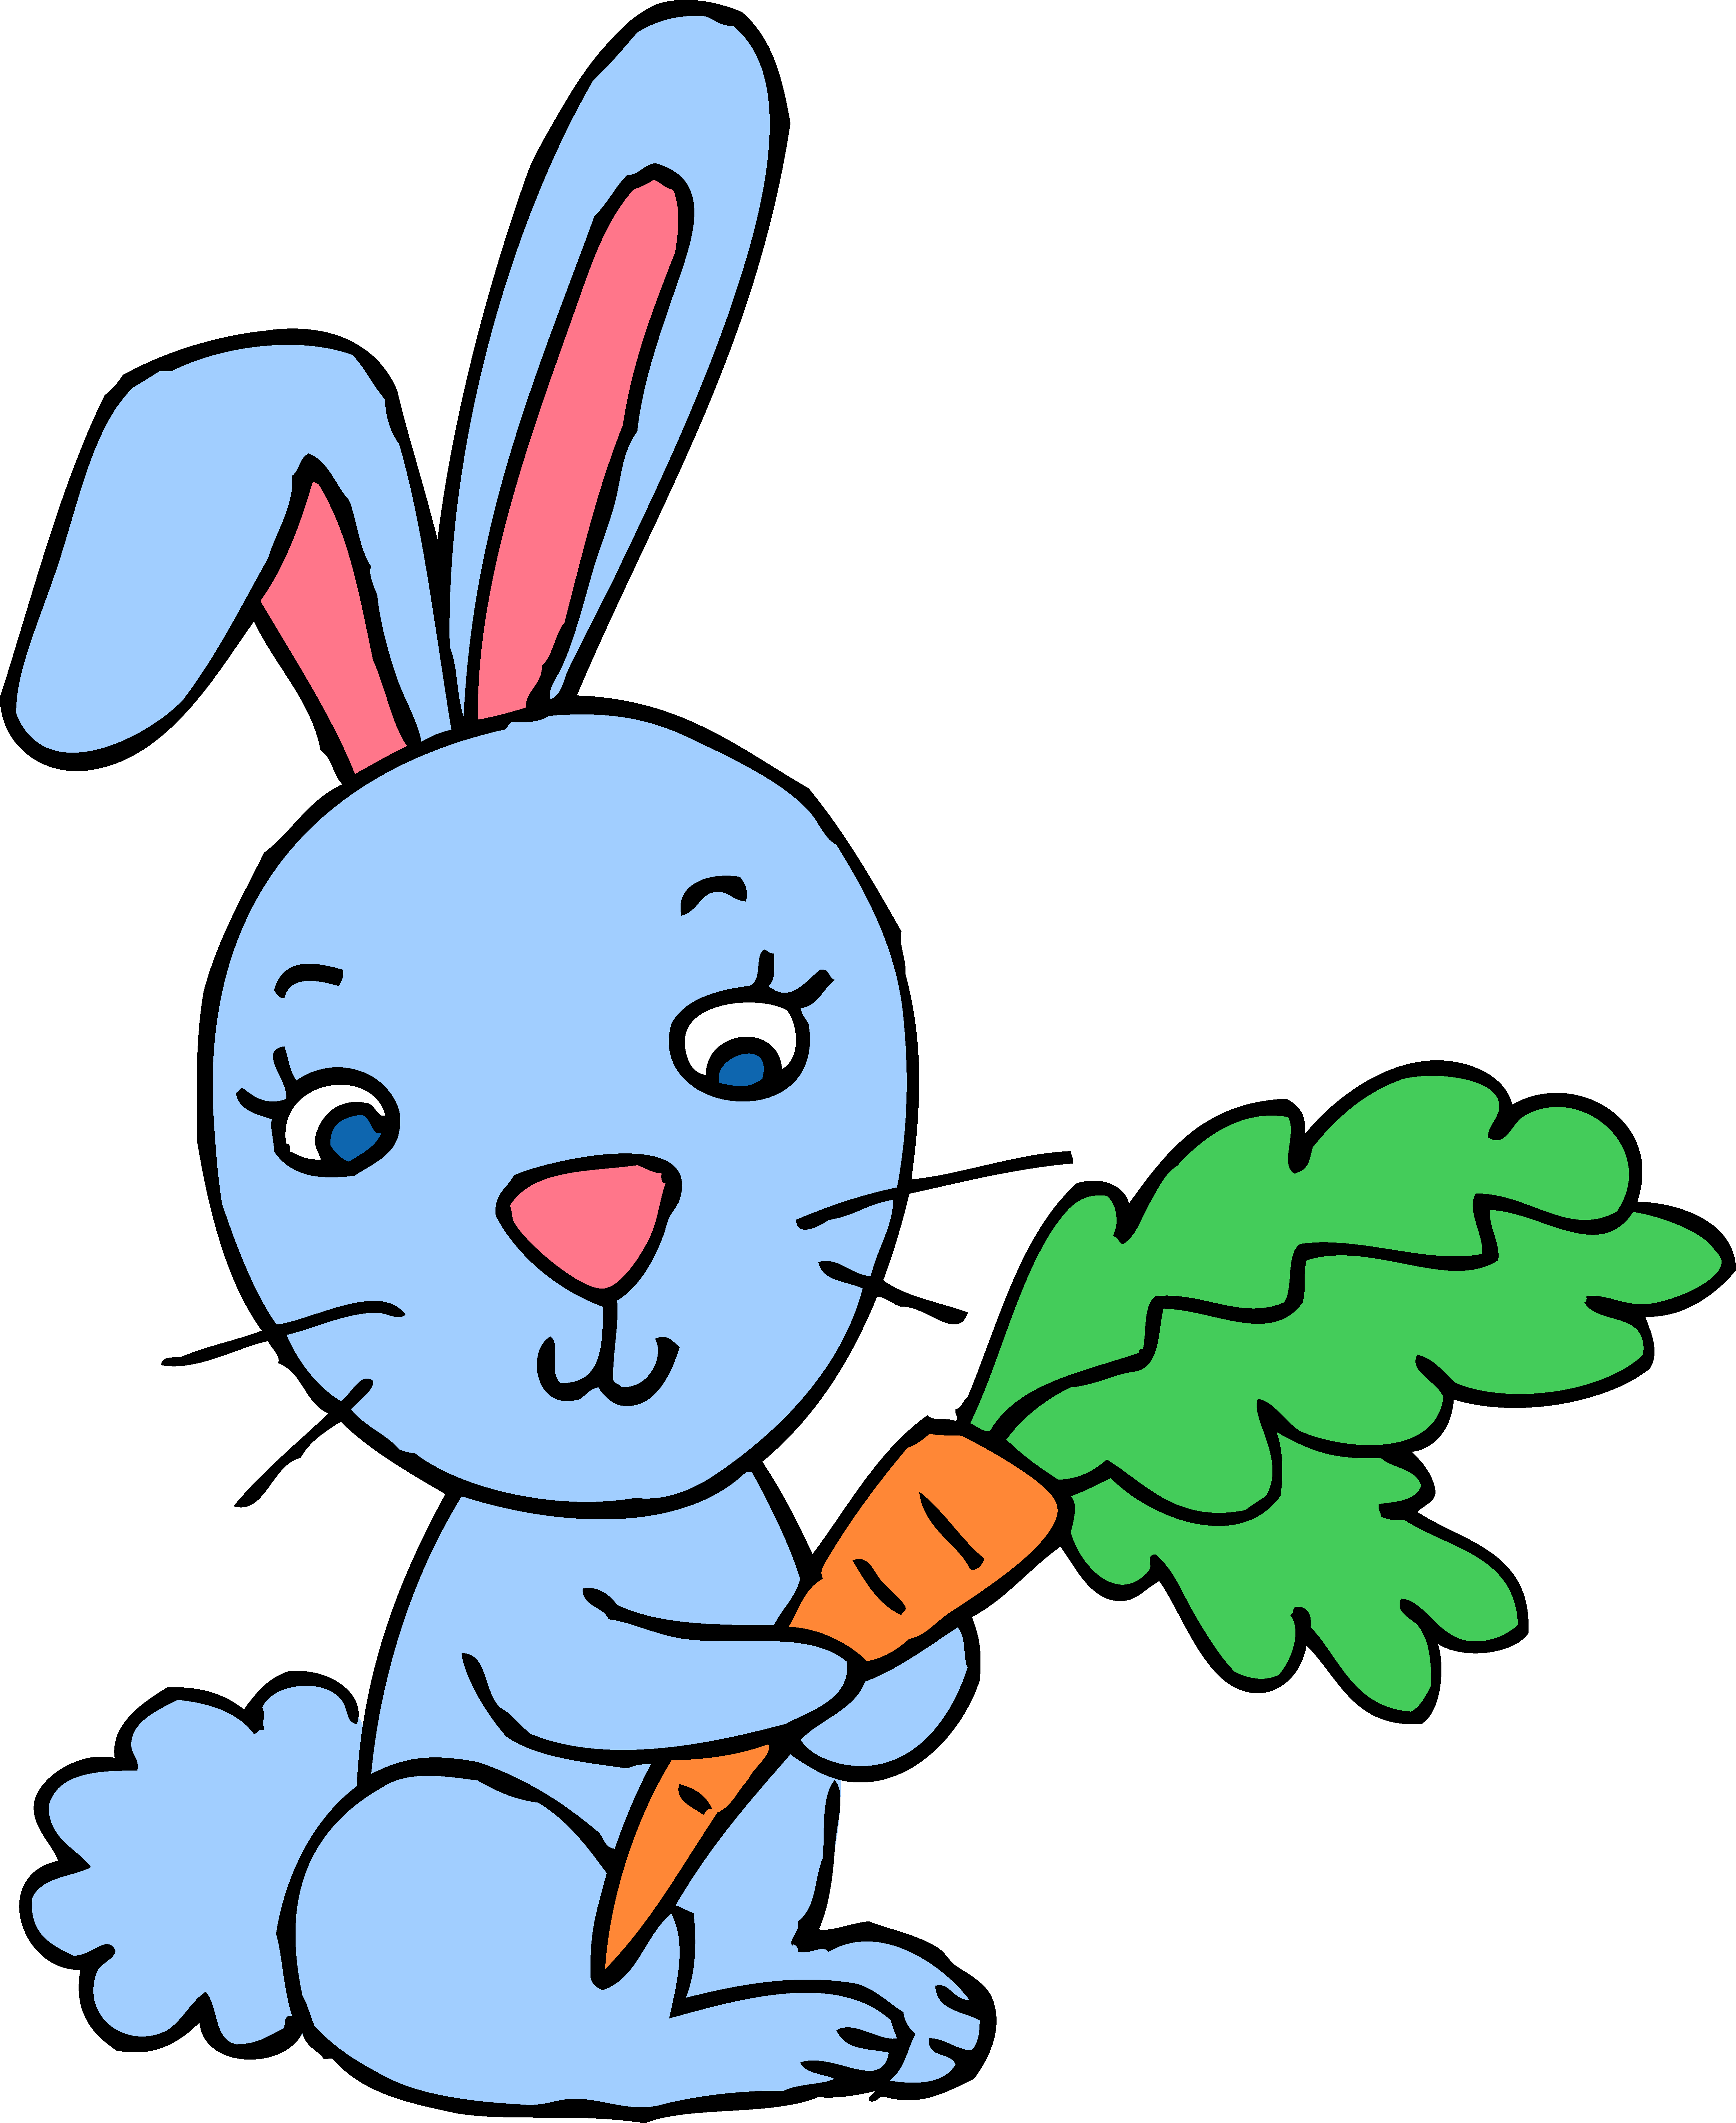 Blue Bunny Rabbit With Carrot Free Clip Art.